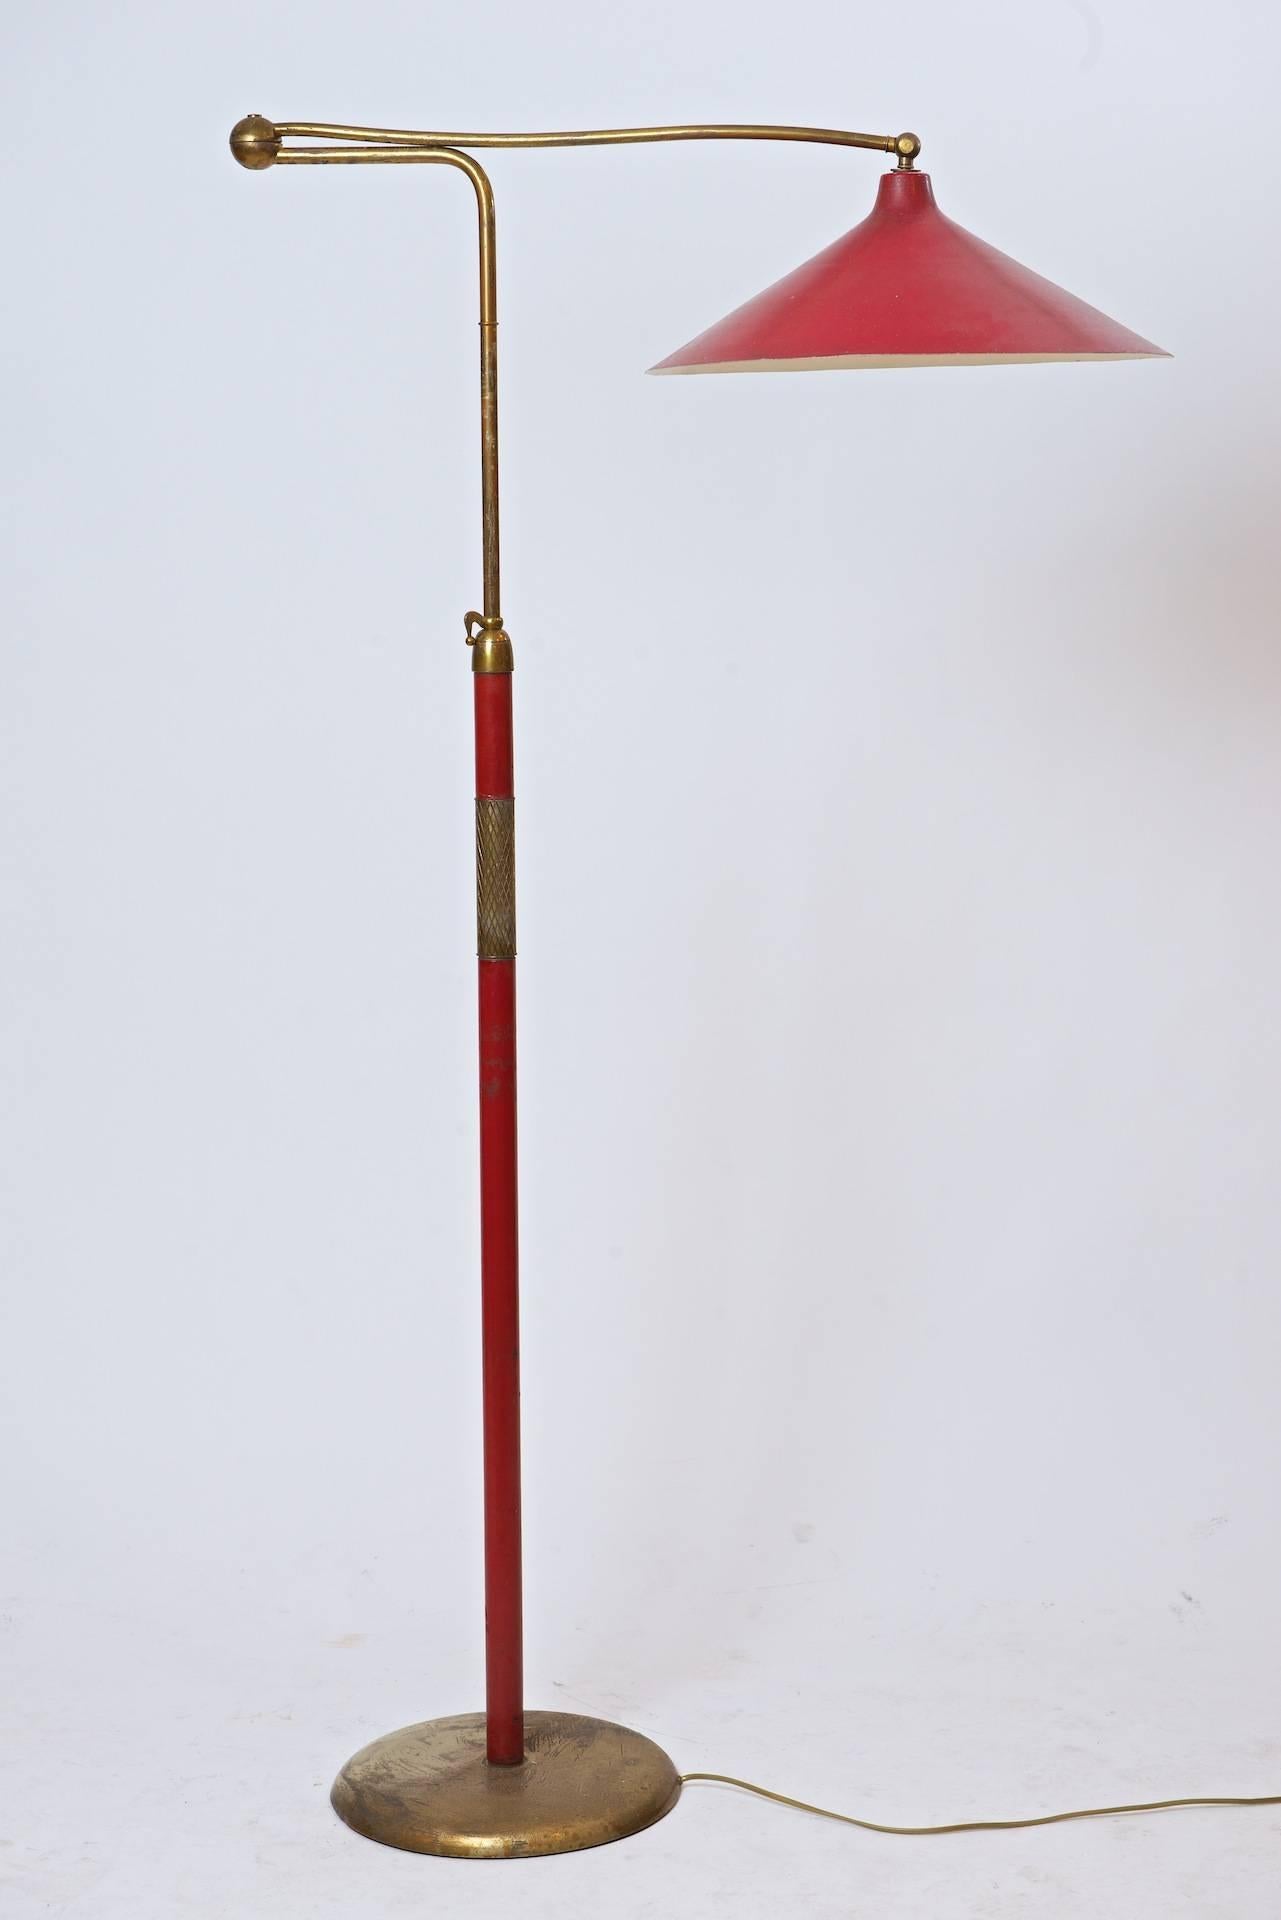 Brass, red stitched leather red laquer shade.

Height can be adjusted. Shade has possibly been replaced.